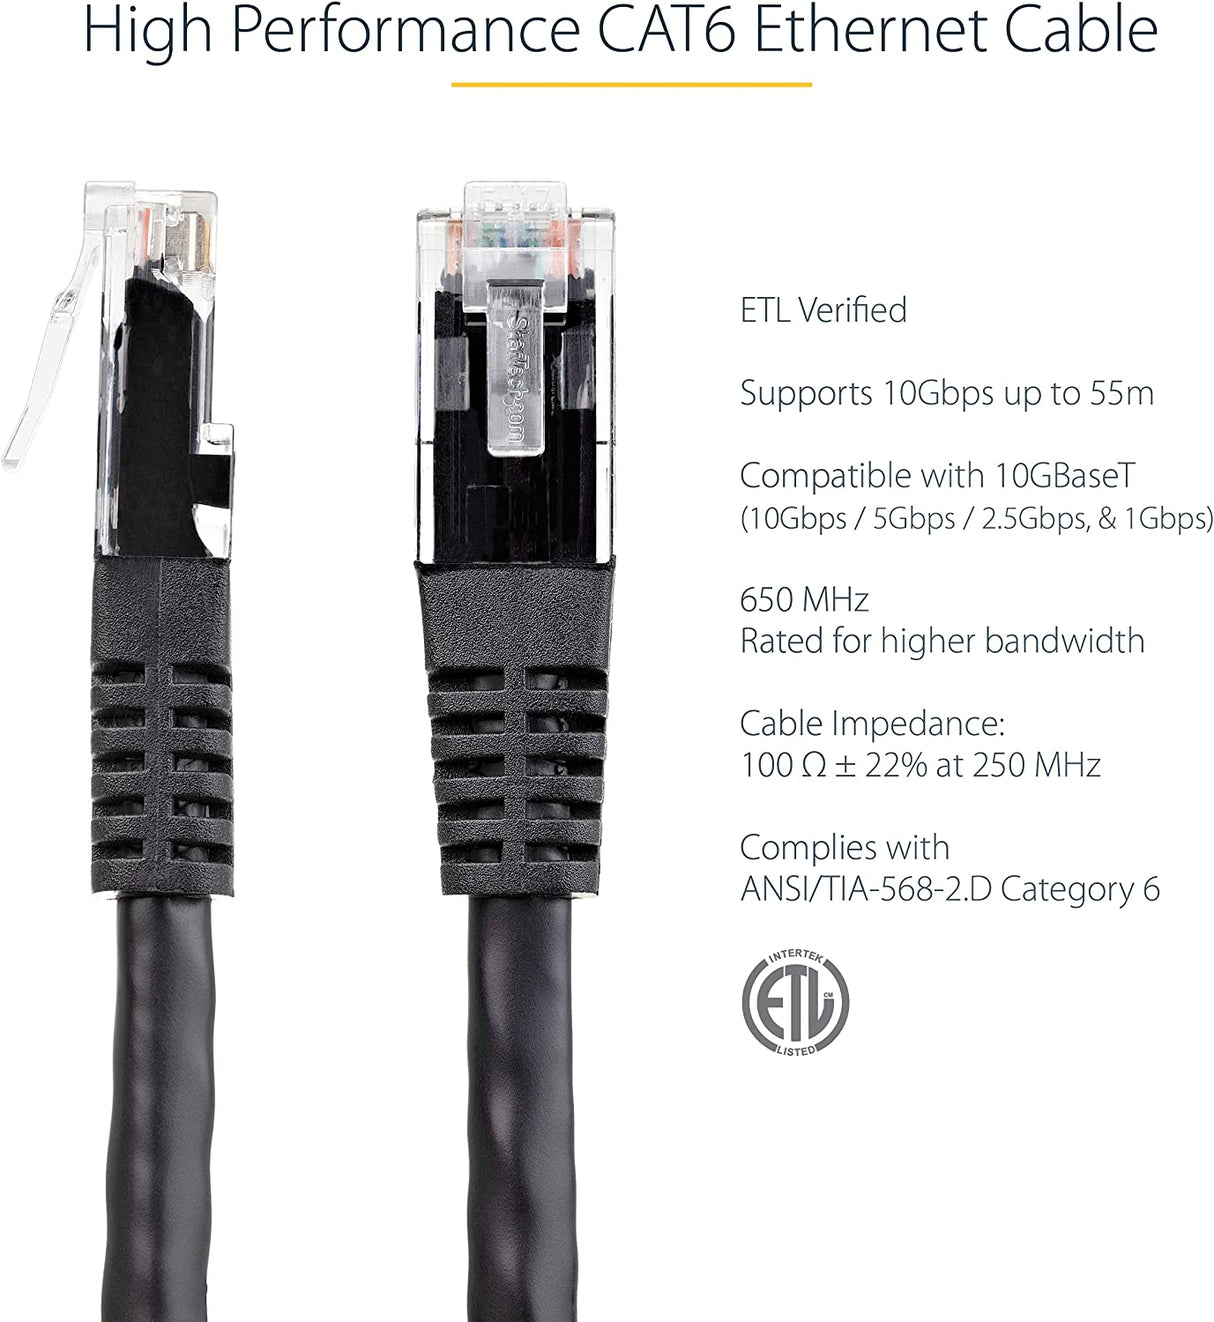 StarTech.com 6ft CAT6 Ethernet Cable - Black CAT 6 Gigabit Ethernet Wire -650MHz 100W PoE++ RJ45 UTP Molded Category 6 Network/Patch Cord w/Strain Relief/Fluke Tested UL/TIA Certified (C6PATCH6BK) Black 6 ft / 1.82 m 1 Pack